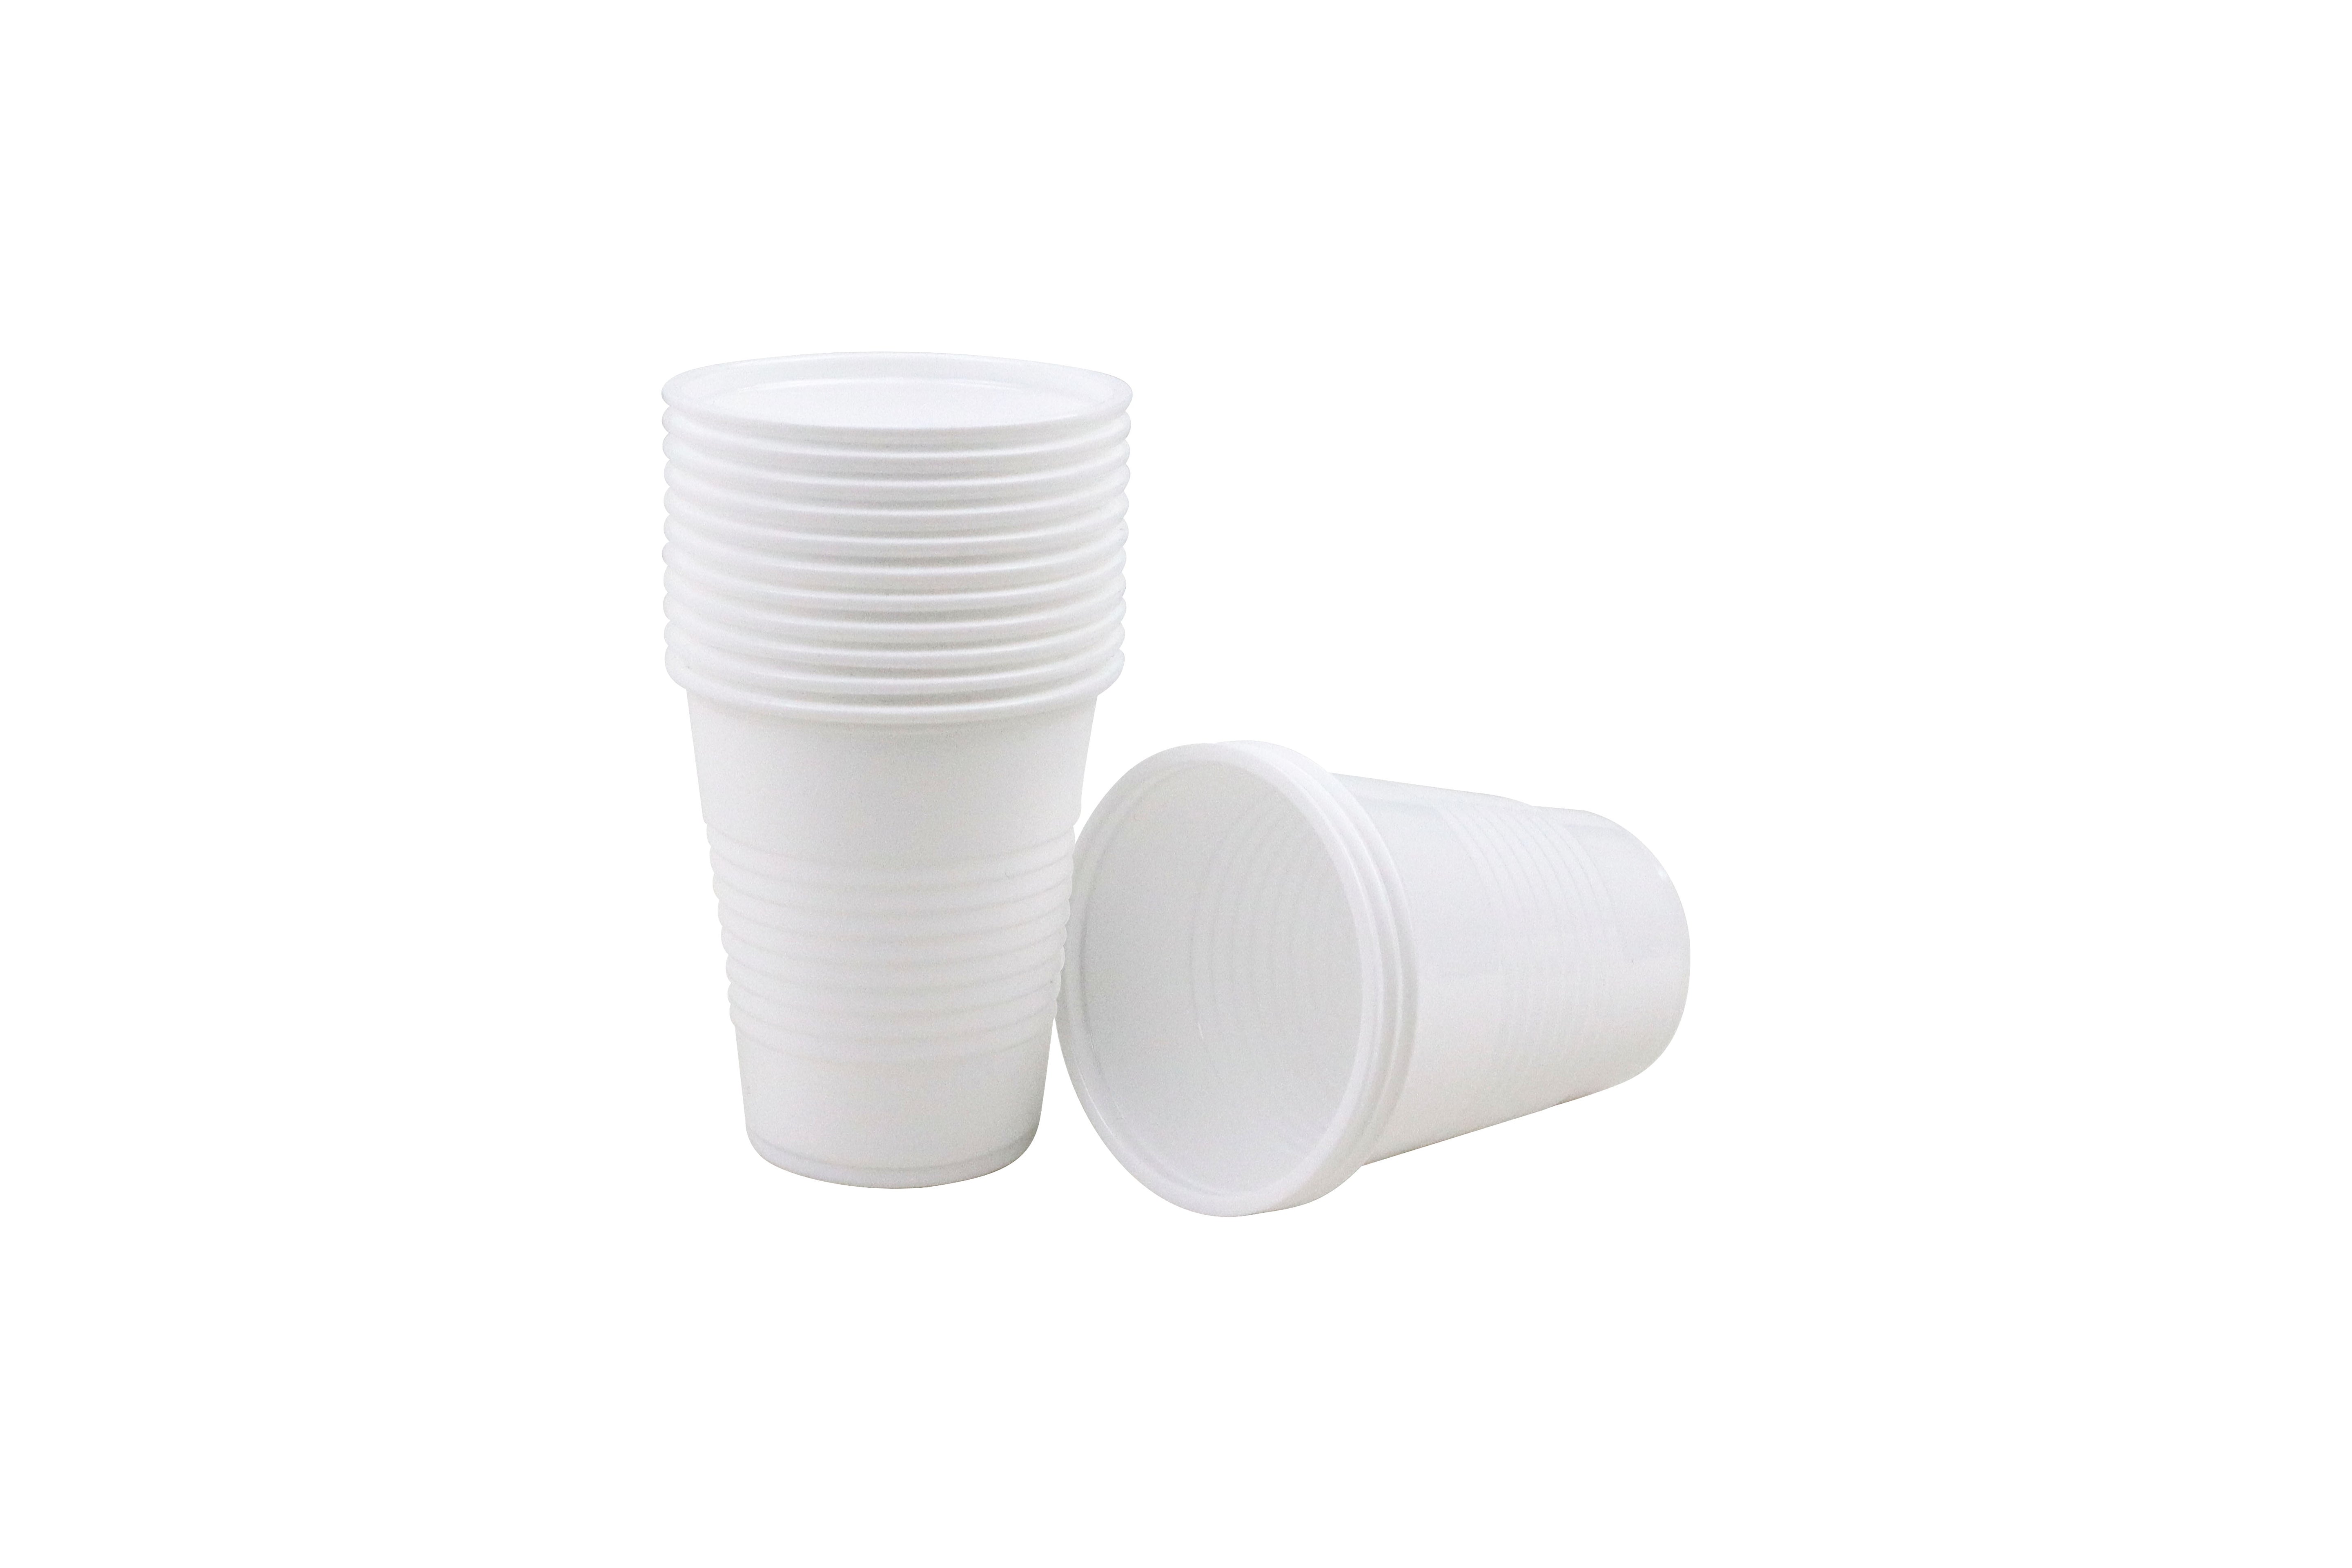 Drinking Cups, PP material, 5OZ, 3.0g, 20 bag / case.